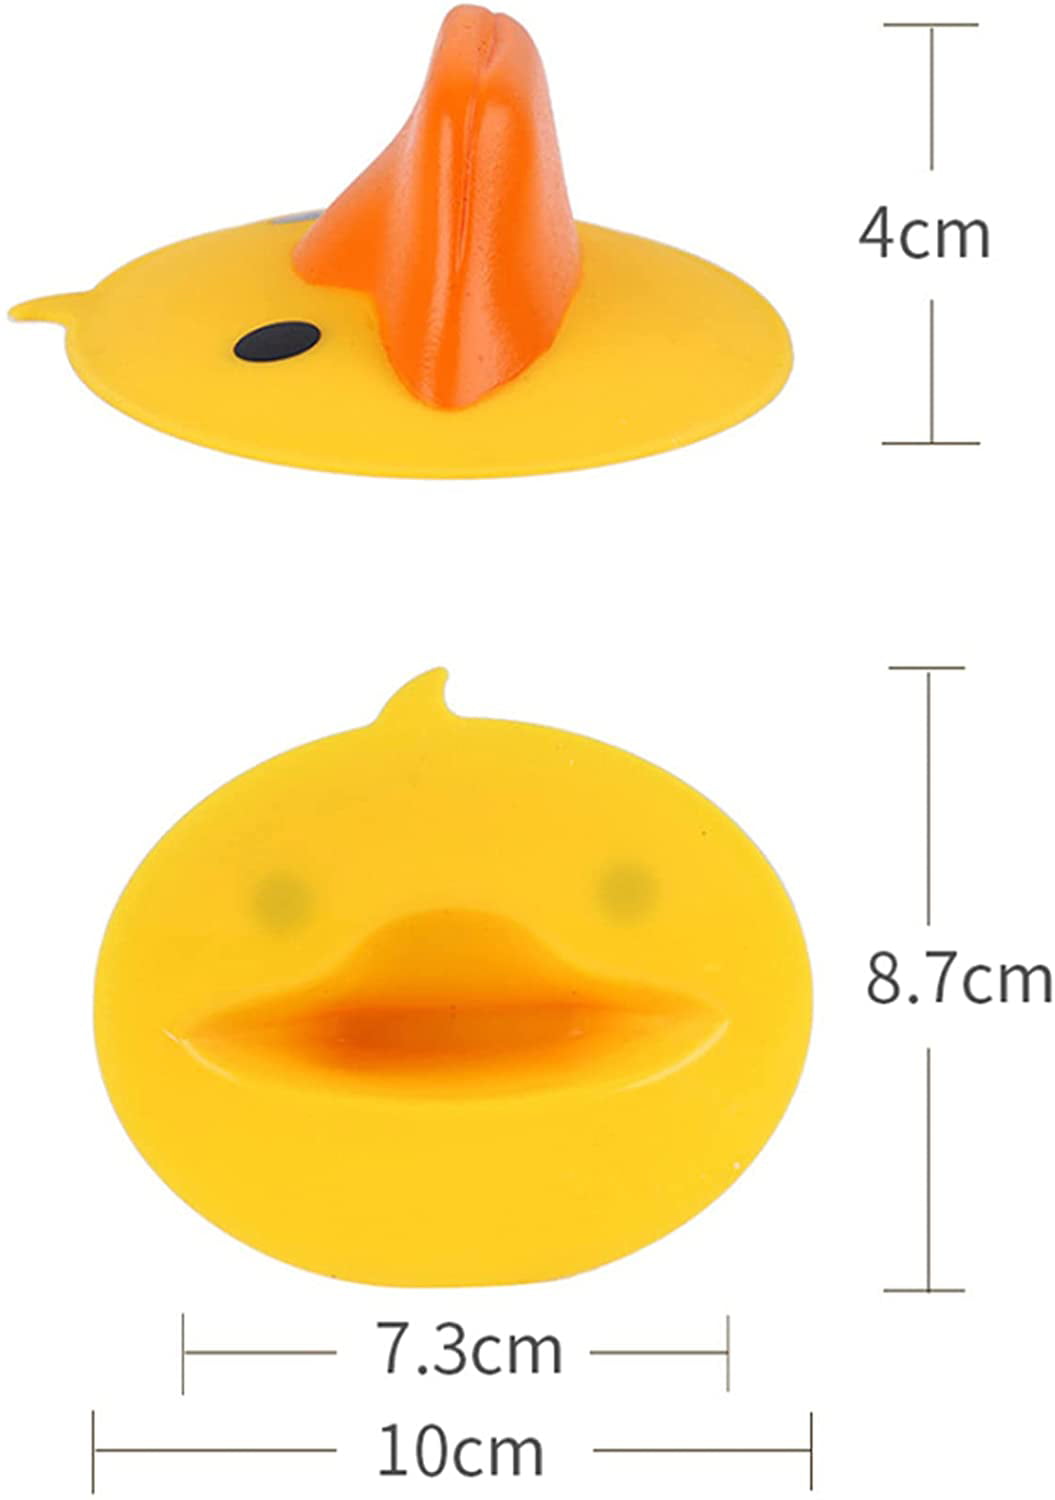 Silicone Heat Resistant,yellow duck Silicone Pinch Holders Pot Holder,Silicone Oven Mitts Heat Resistant Cooking Pinch Mitts Gloves 1 pair CiCy Silicone Pot Holders 2 pic